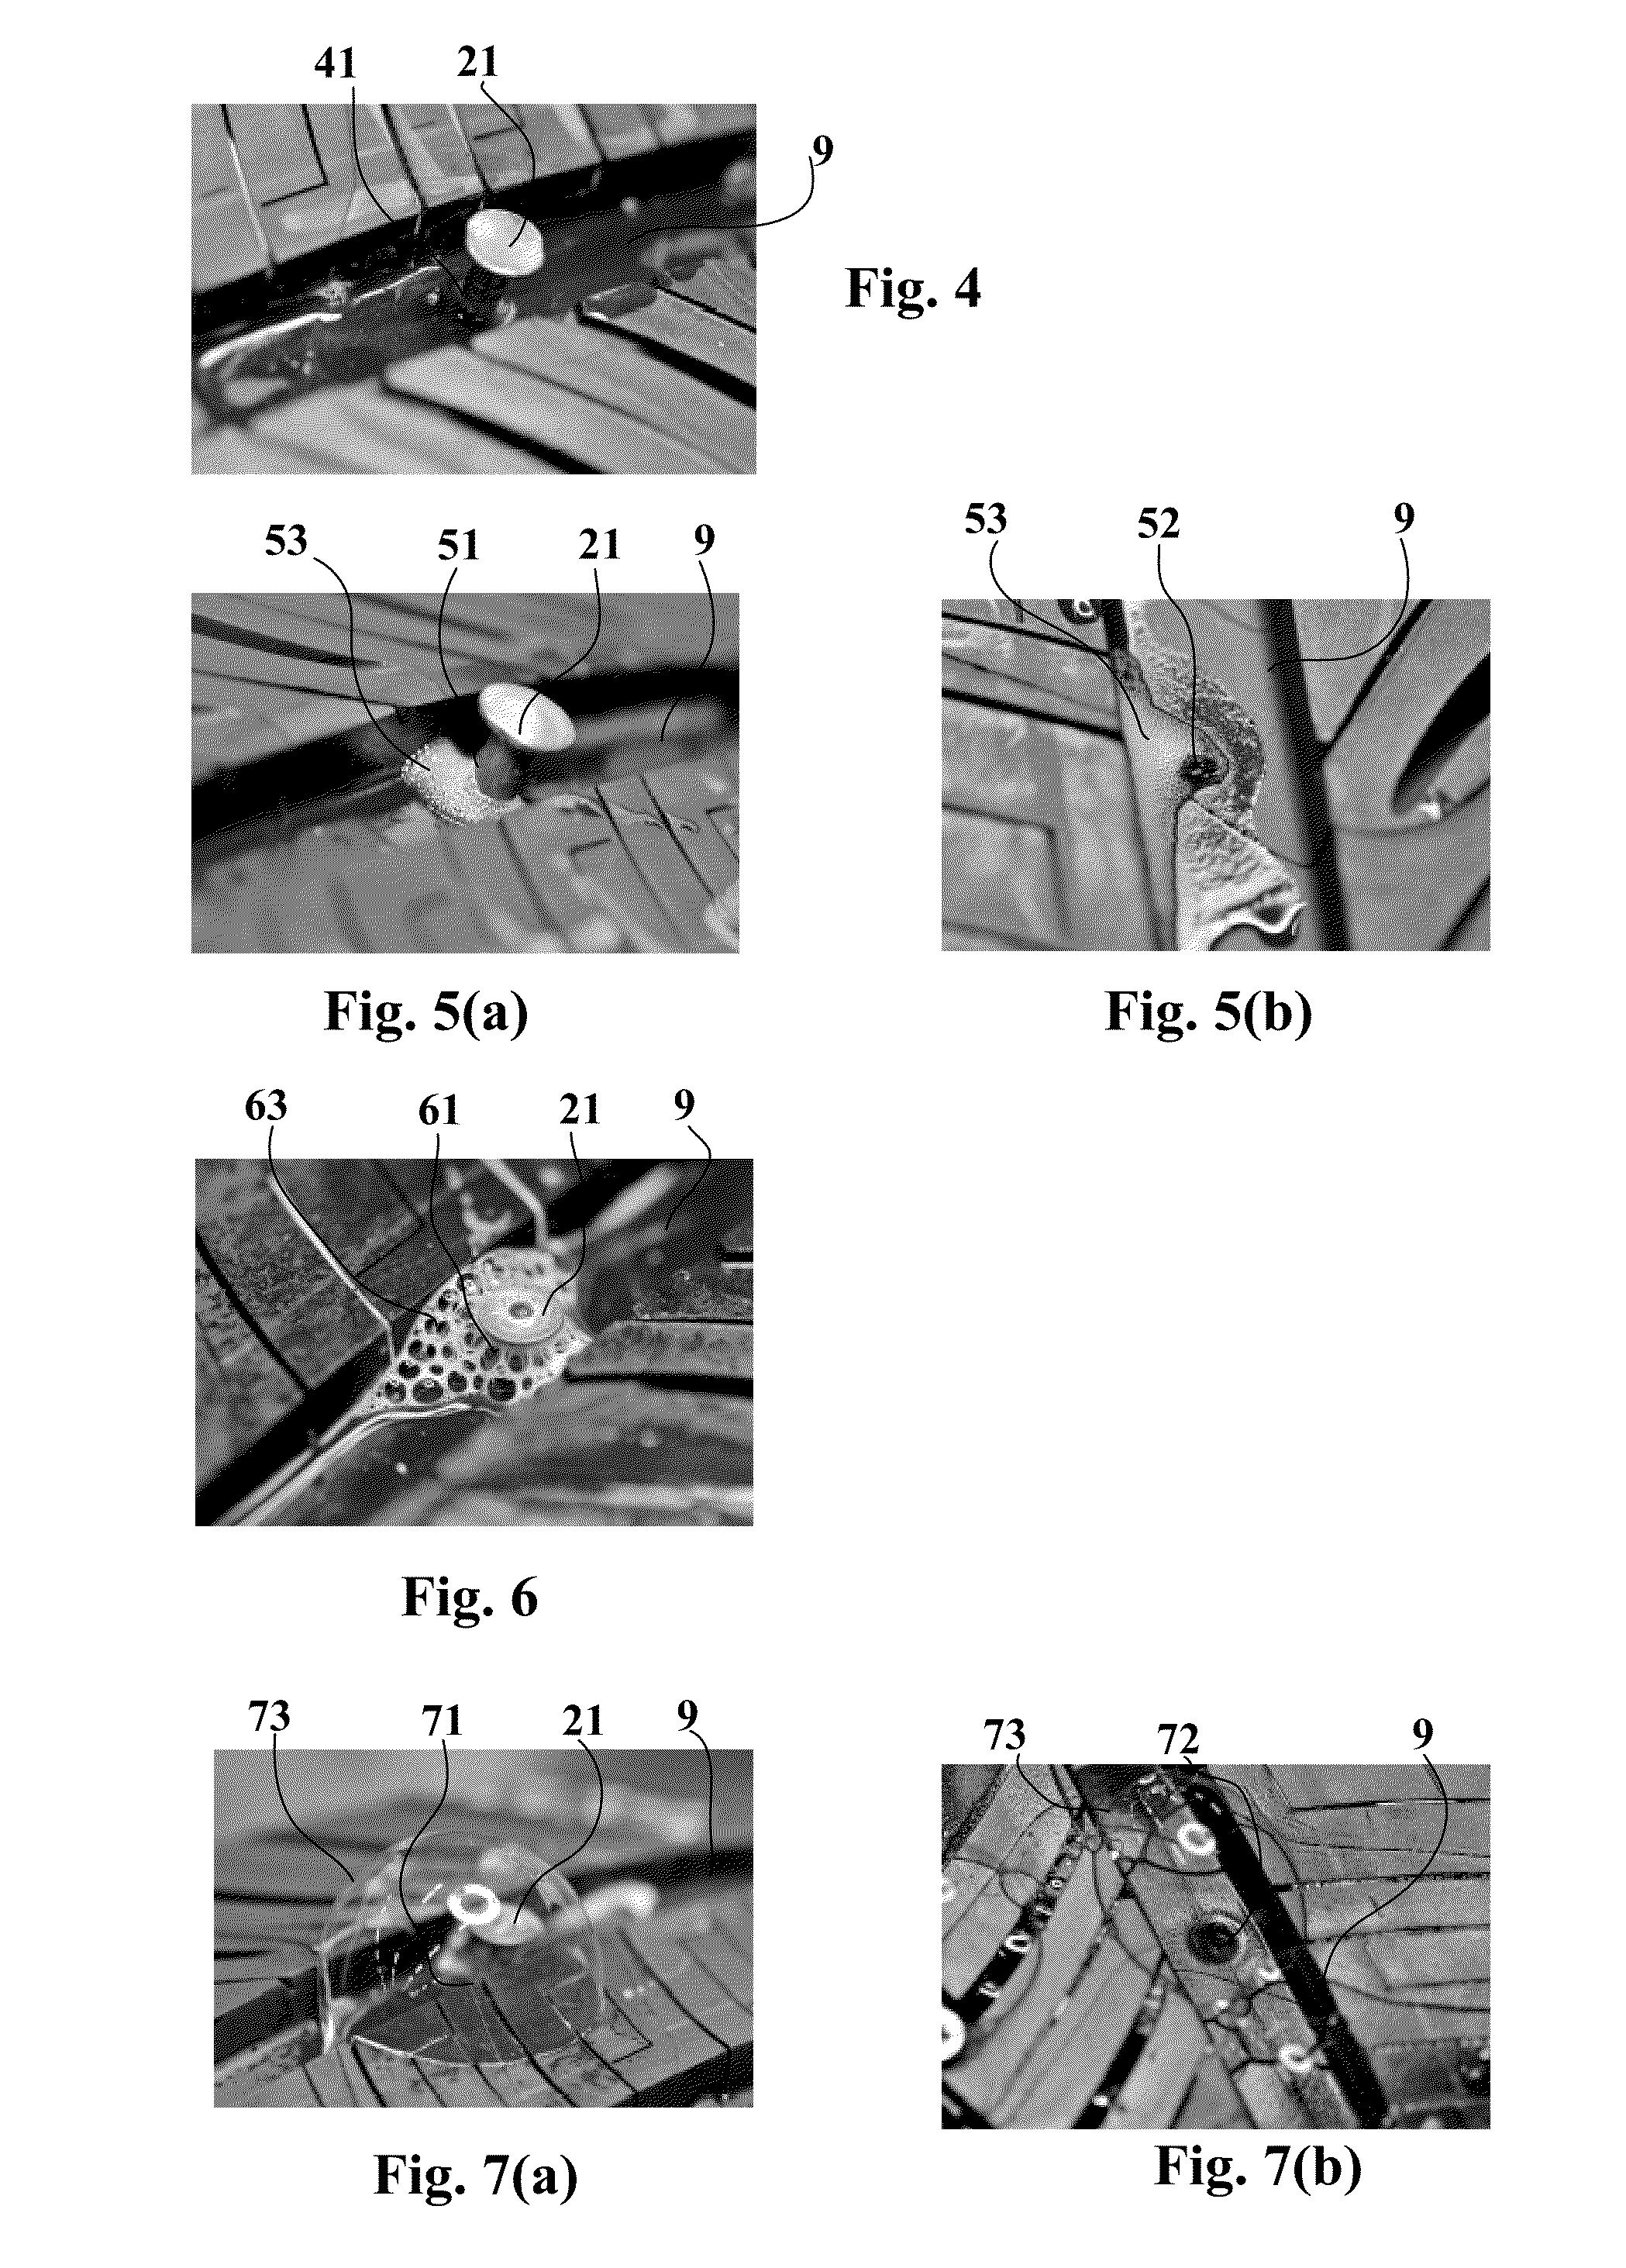 Method for testing the resistance of a tire to pressure loss